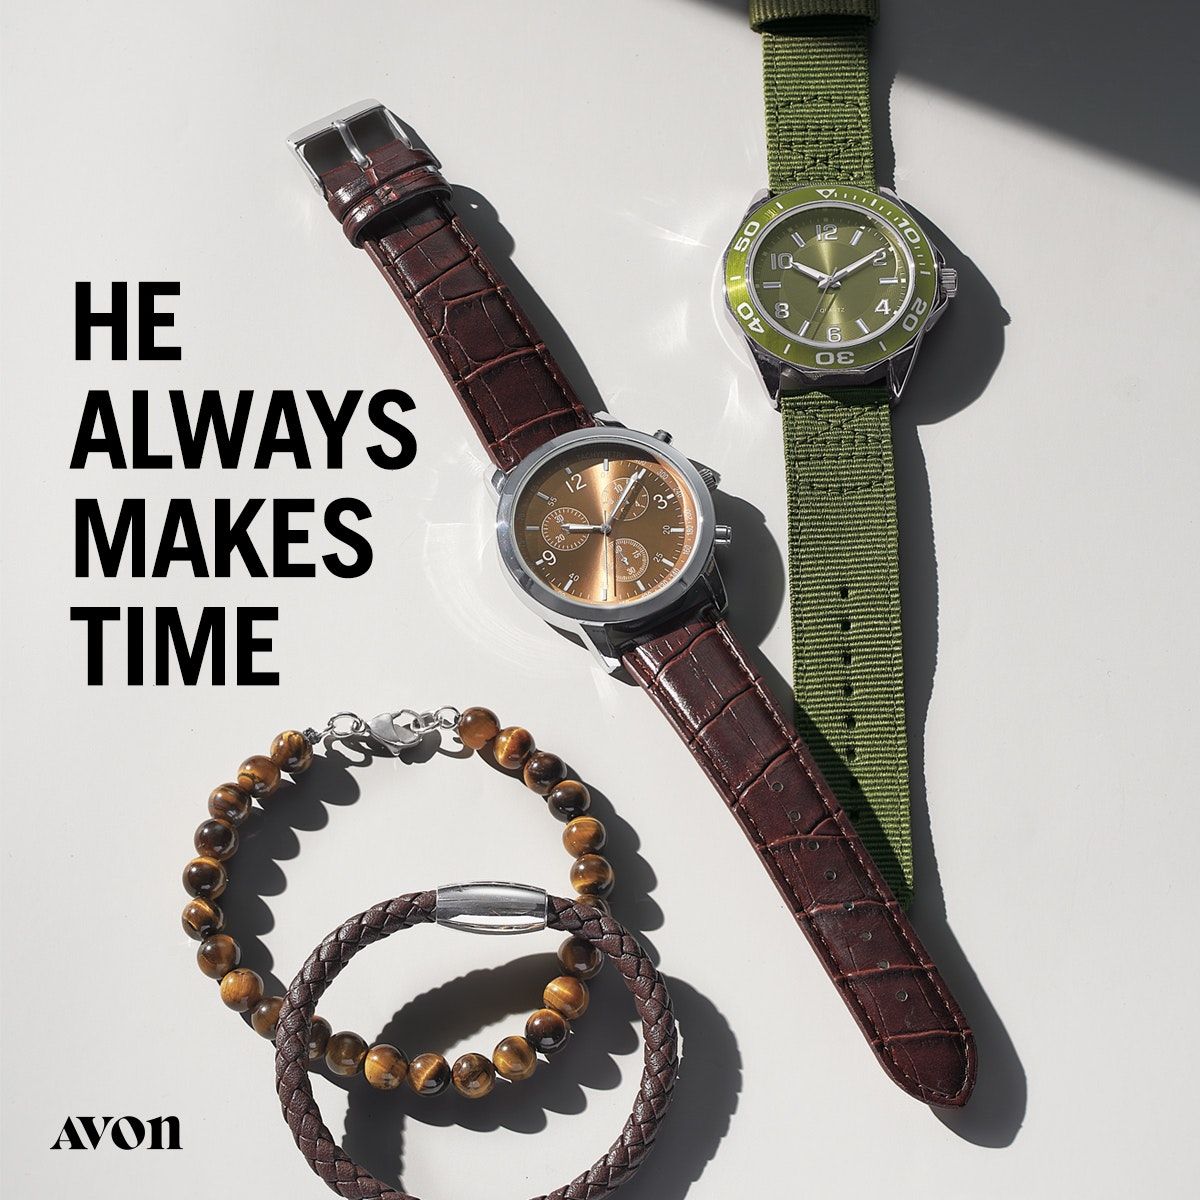 Show him your #FathersDay2019 #avonmen #watches #giftsforhim #avongiftideas